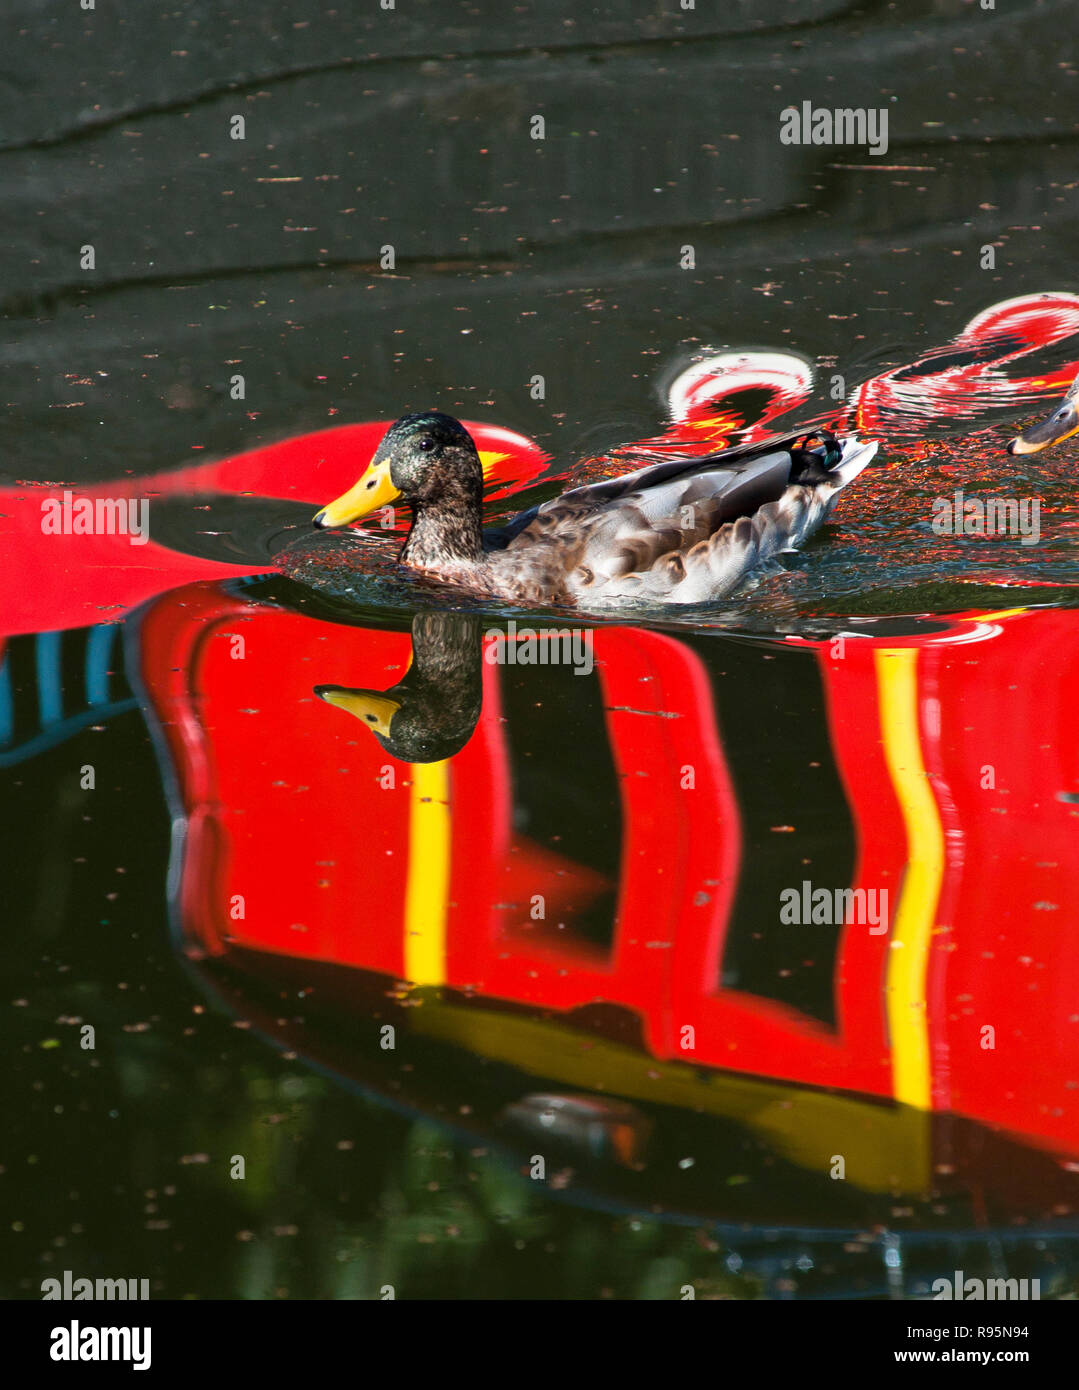 A mallard duck on the canal, with vibrant colors reflecting from the barge above, in Birmingham, England. Stock Photo